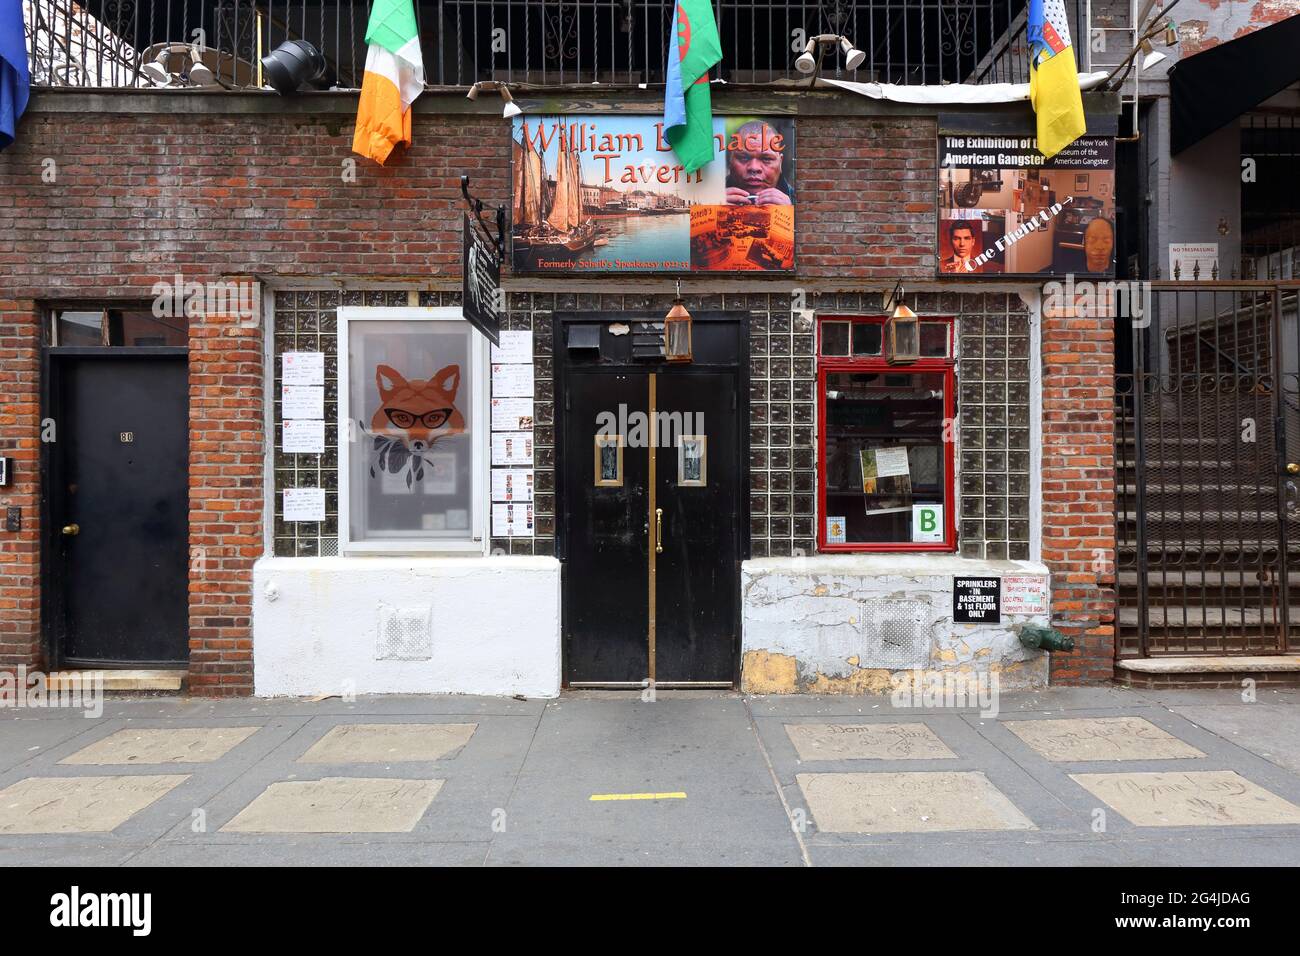 William Barnacle Tavern, 80 St Marks Place, New York, NY. exterior storefront of a bar in the East Village neighborhood of Manhattan. Stock Photo